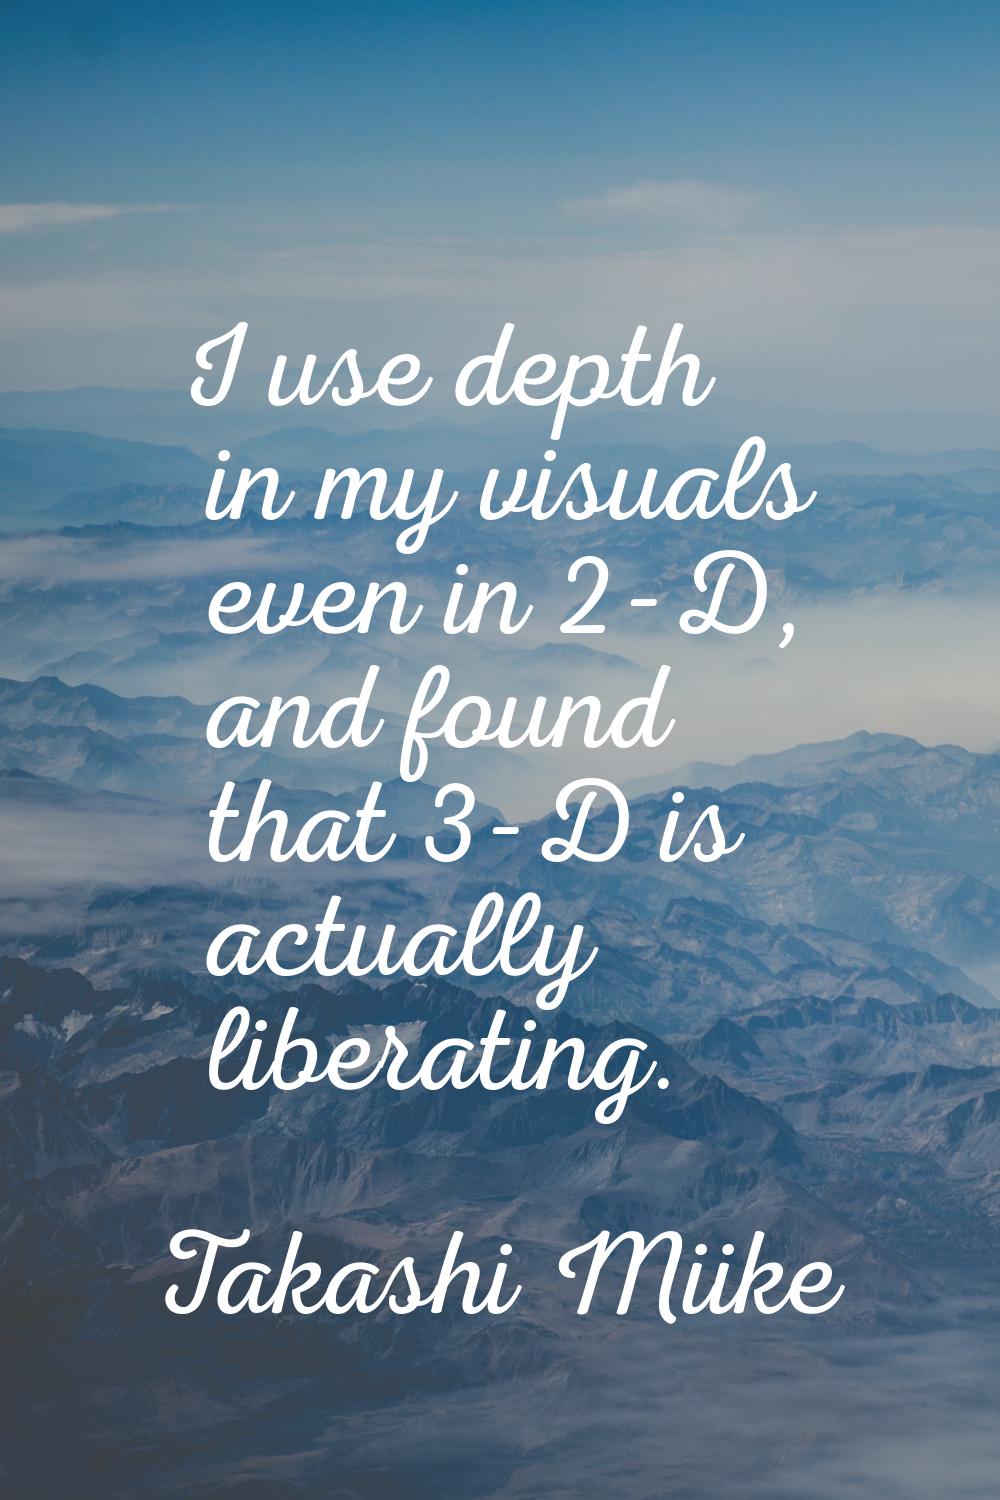 I use depth in my visuals even in 2-D, and found that 3-D is actually liberating.